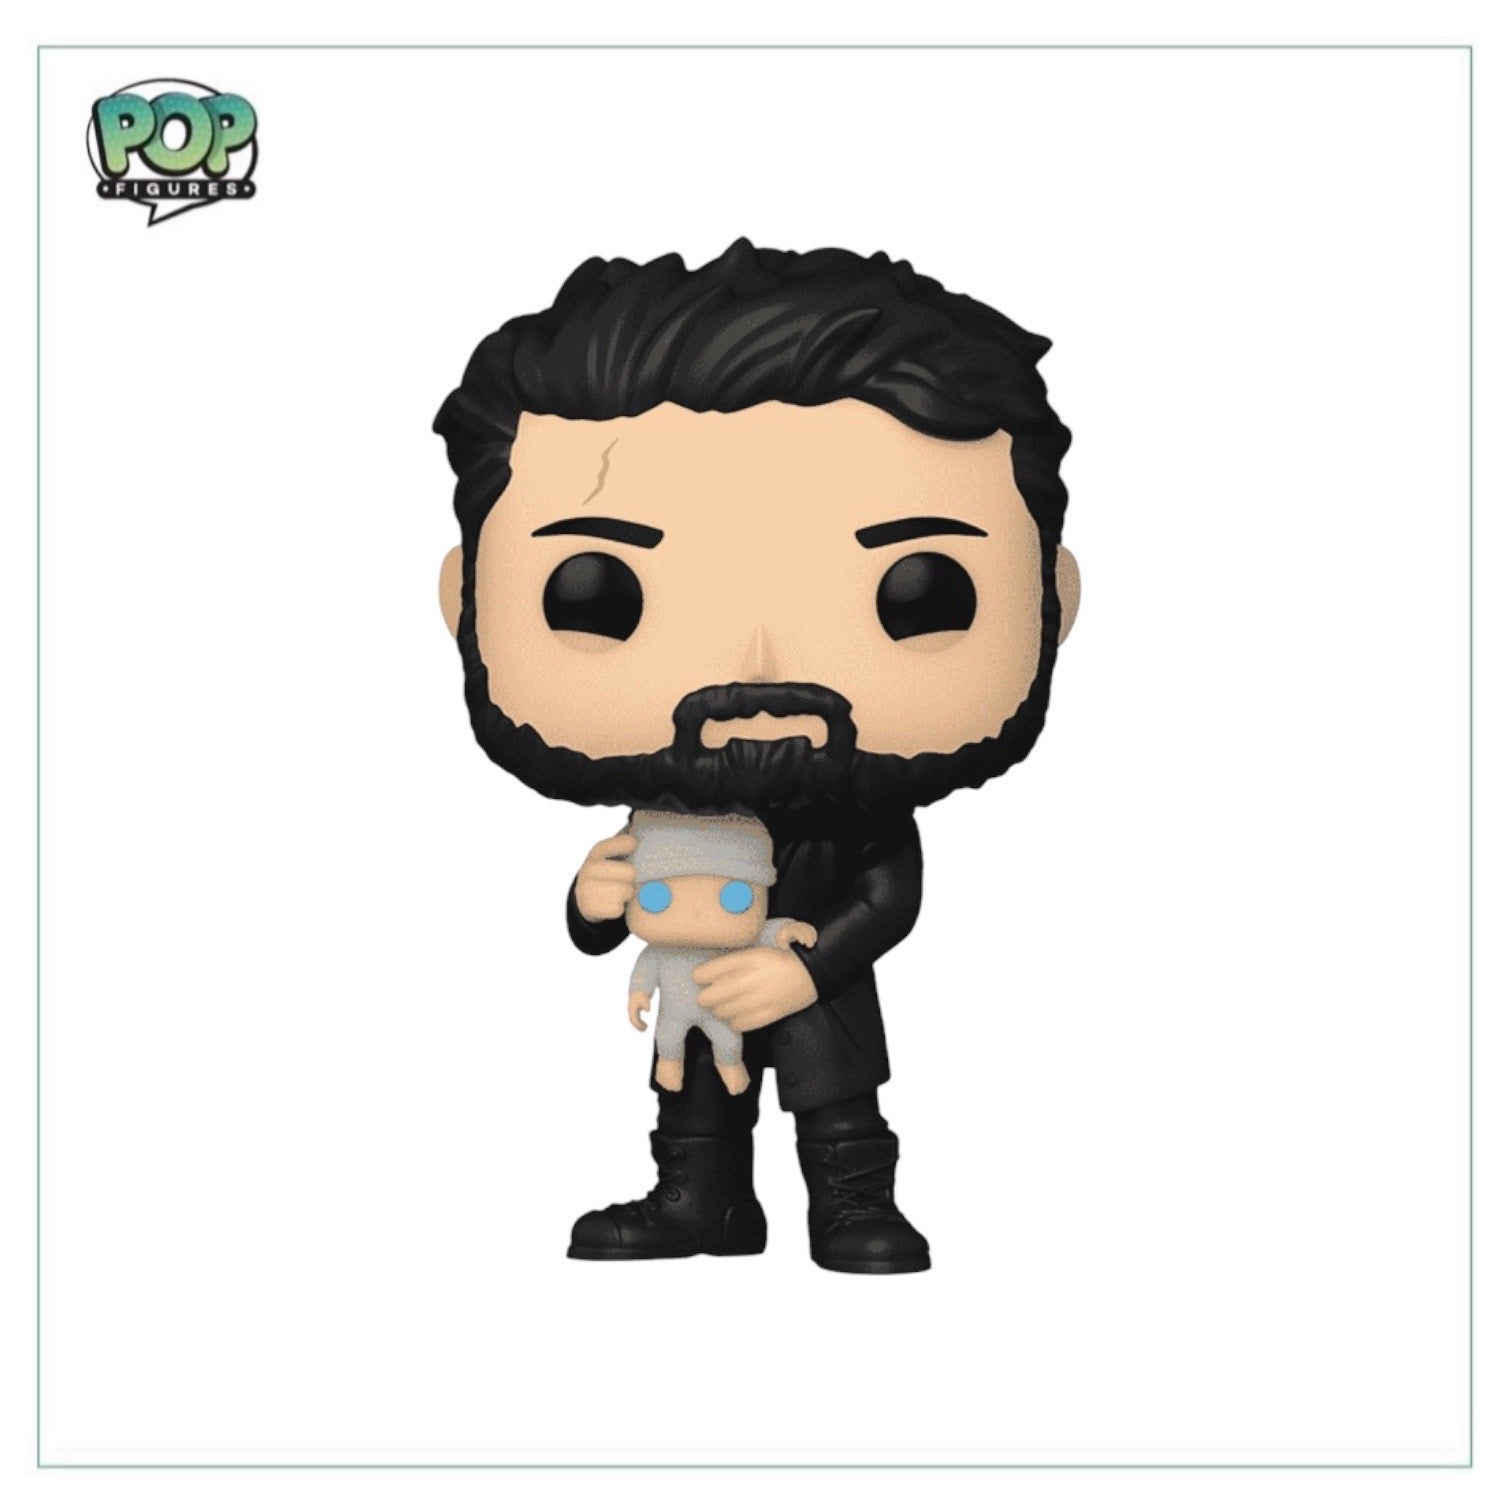 Billy Butcher with Laser Baby #1504 Funko Pop! - The Boys - Funko Shop Exclusive